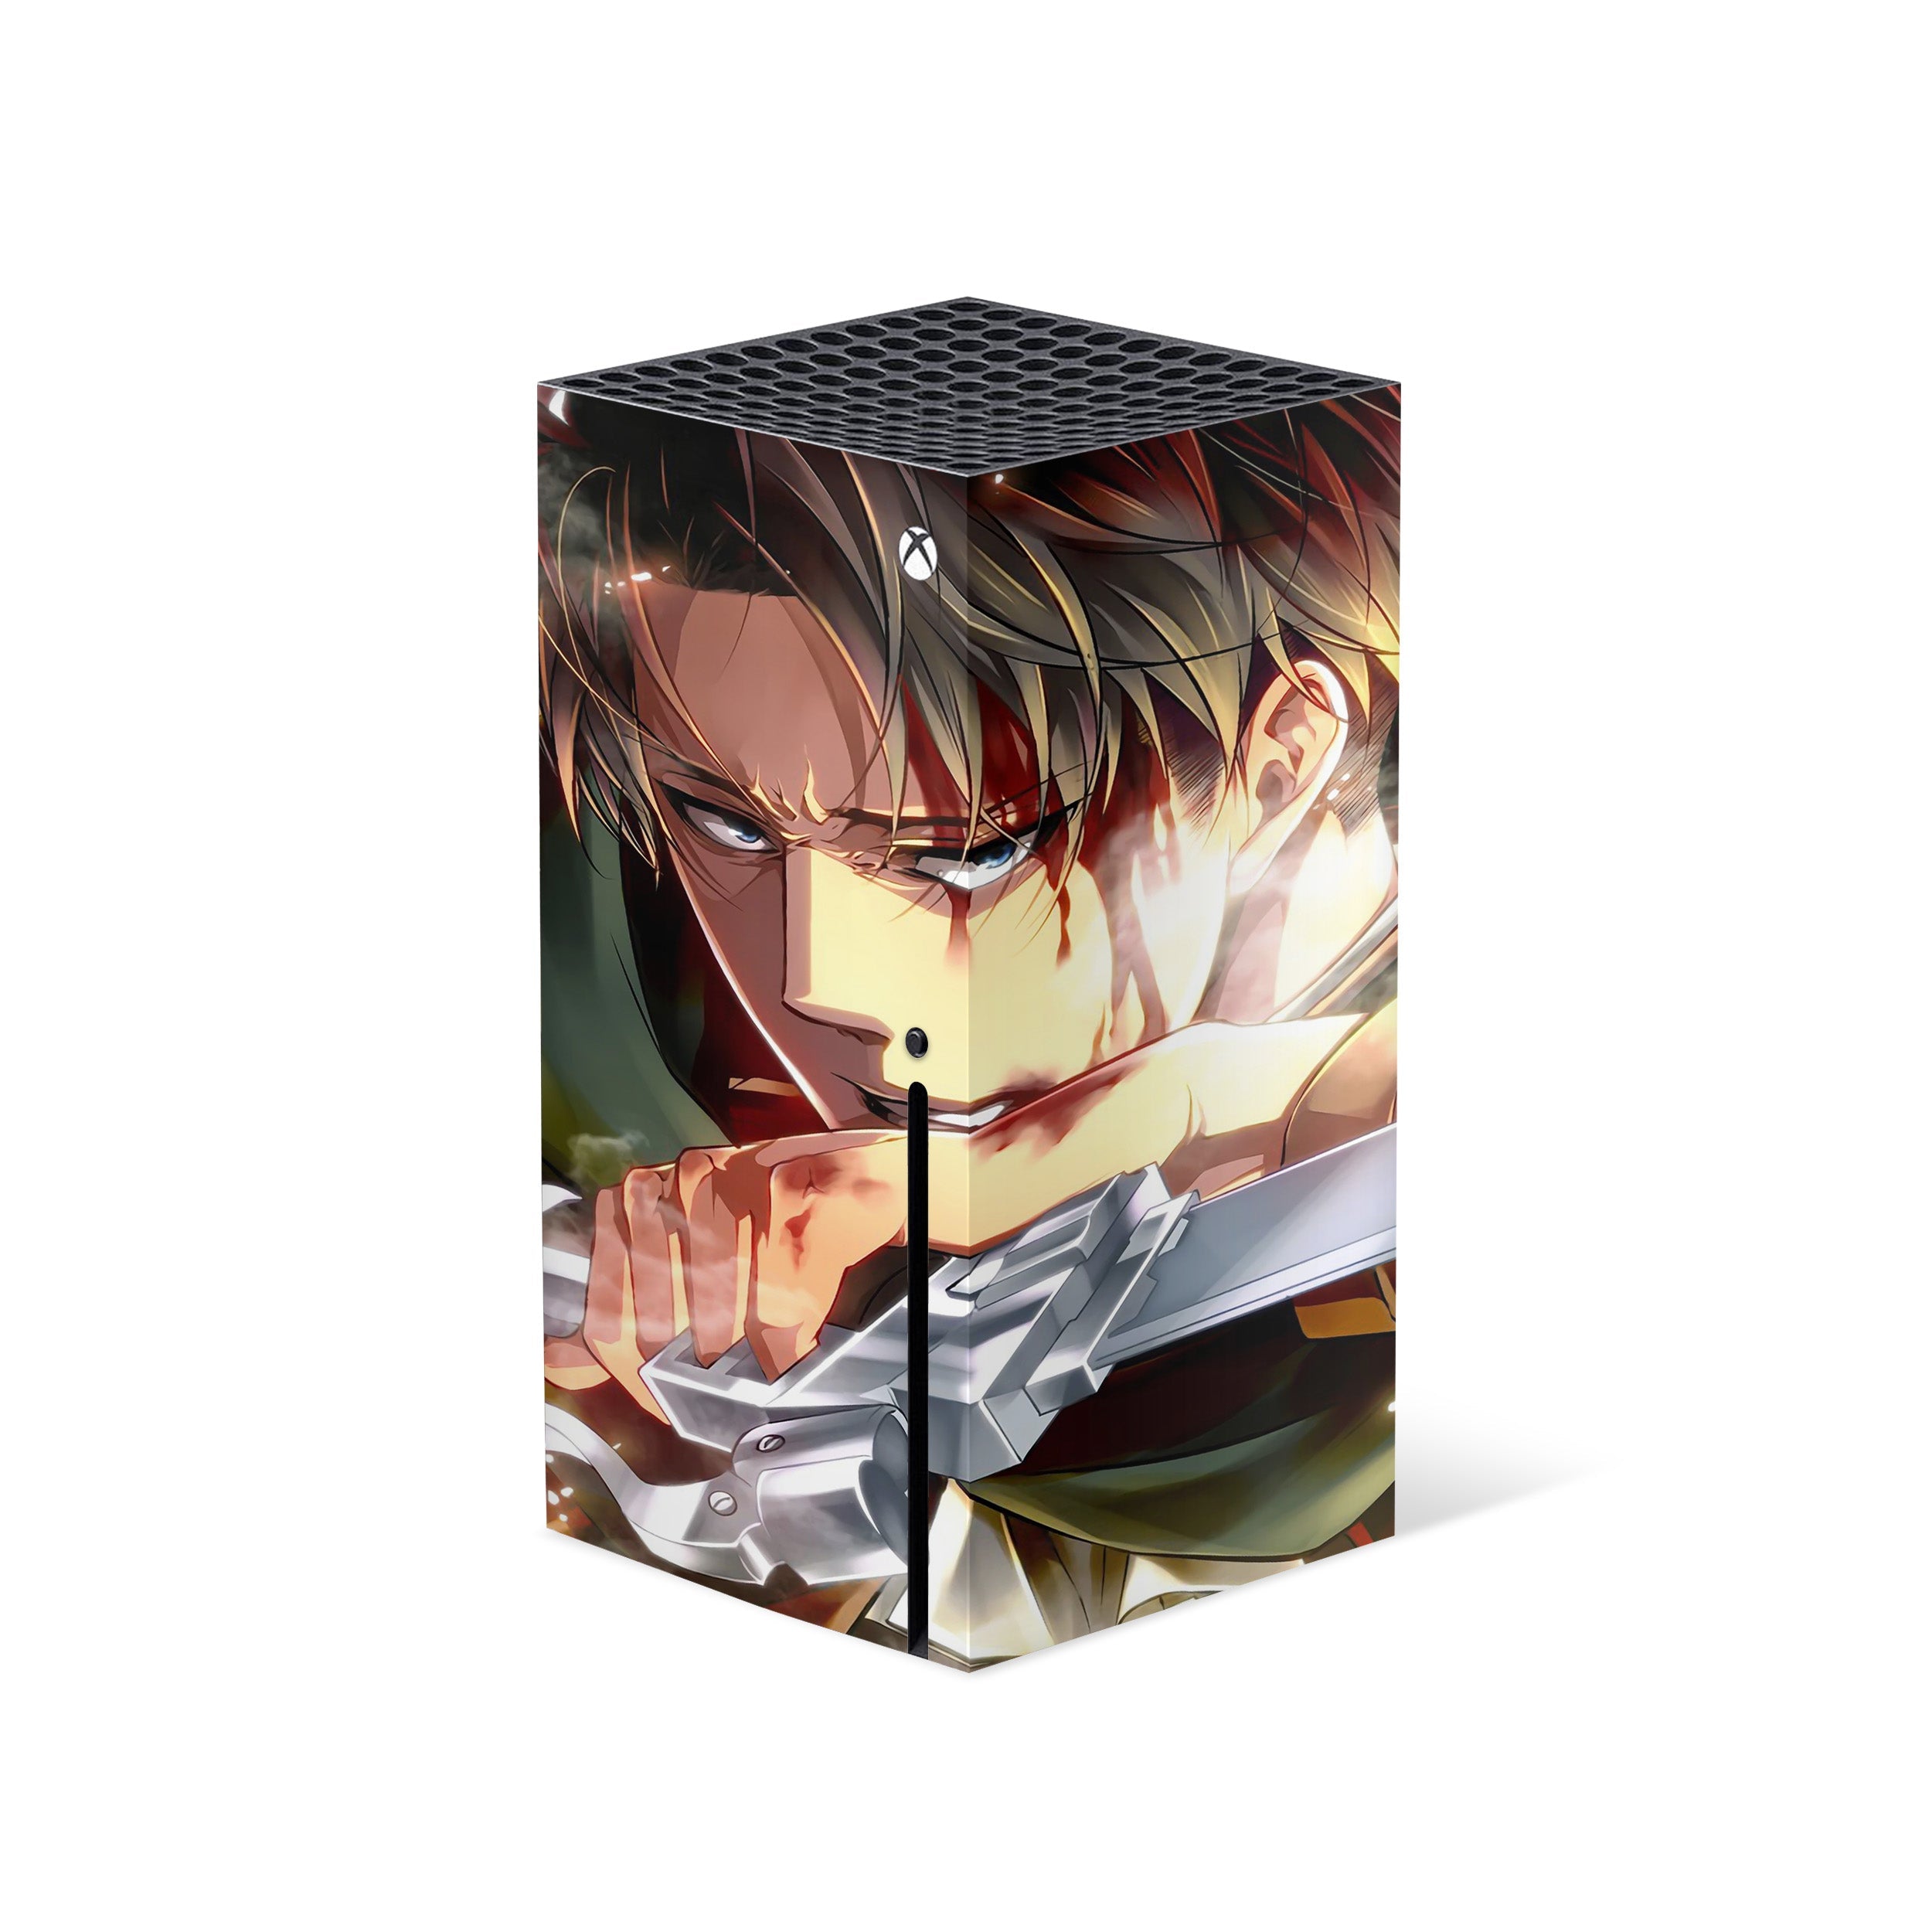 A video game skin featuring a Attack On Titan Levi Ackerman design for the Xbox Series X.